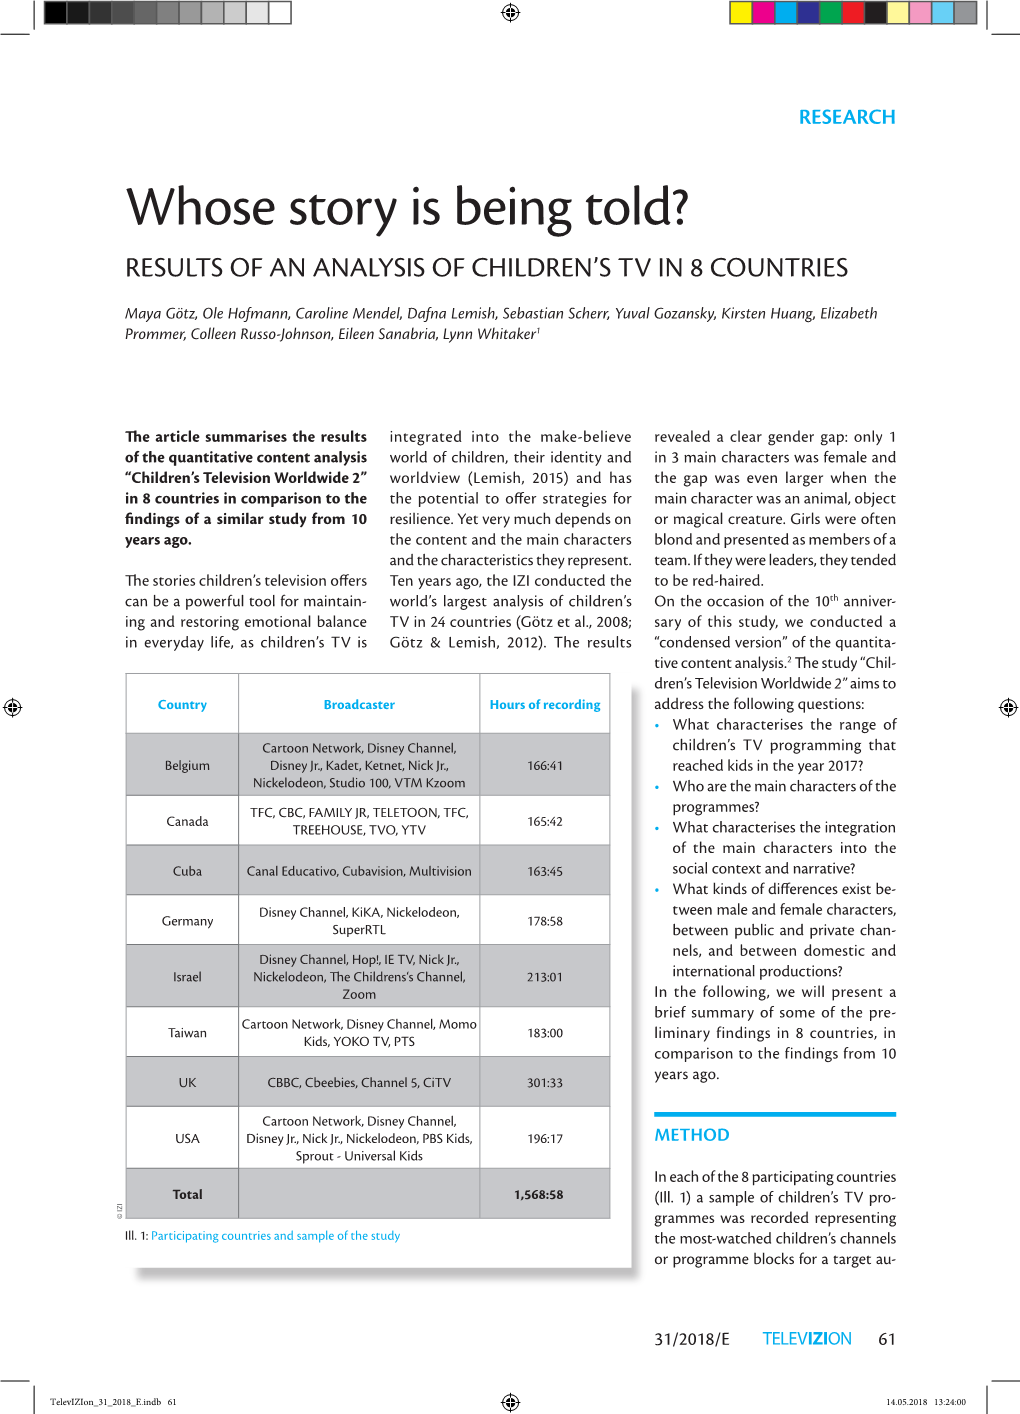 Whose Story Is Being Told? RESULTS of an ANALYSIS of CHILDREN’S TV in 8 COUNTRIES